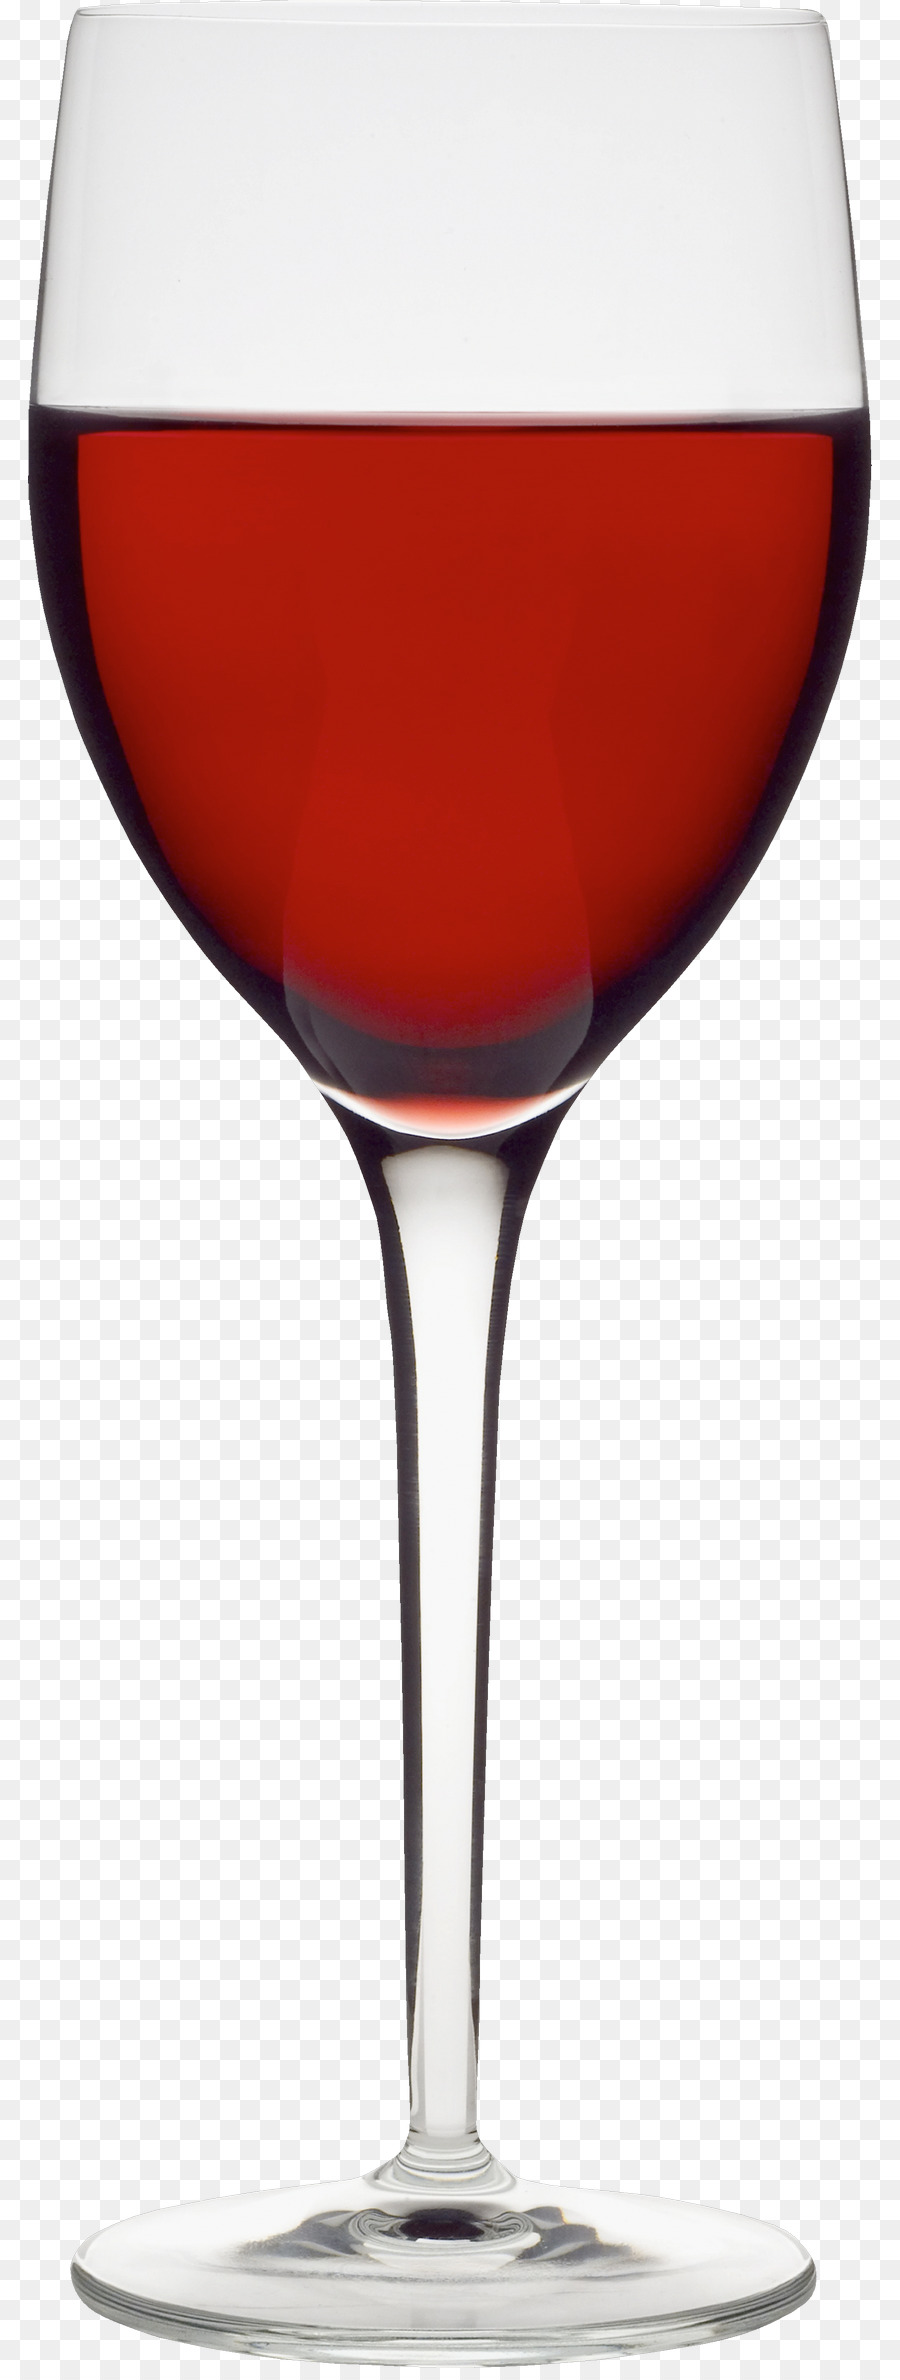 Wine glass Champagne Portable Network Graphics Clip art - wine png download - 844*2368 - Free Transparent Wine png Download.